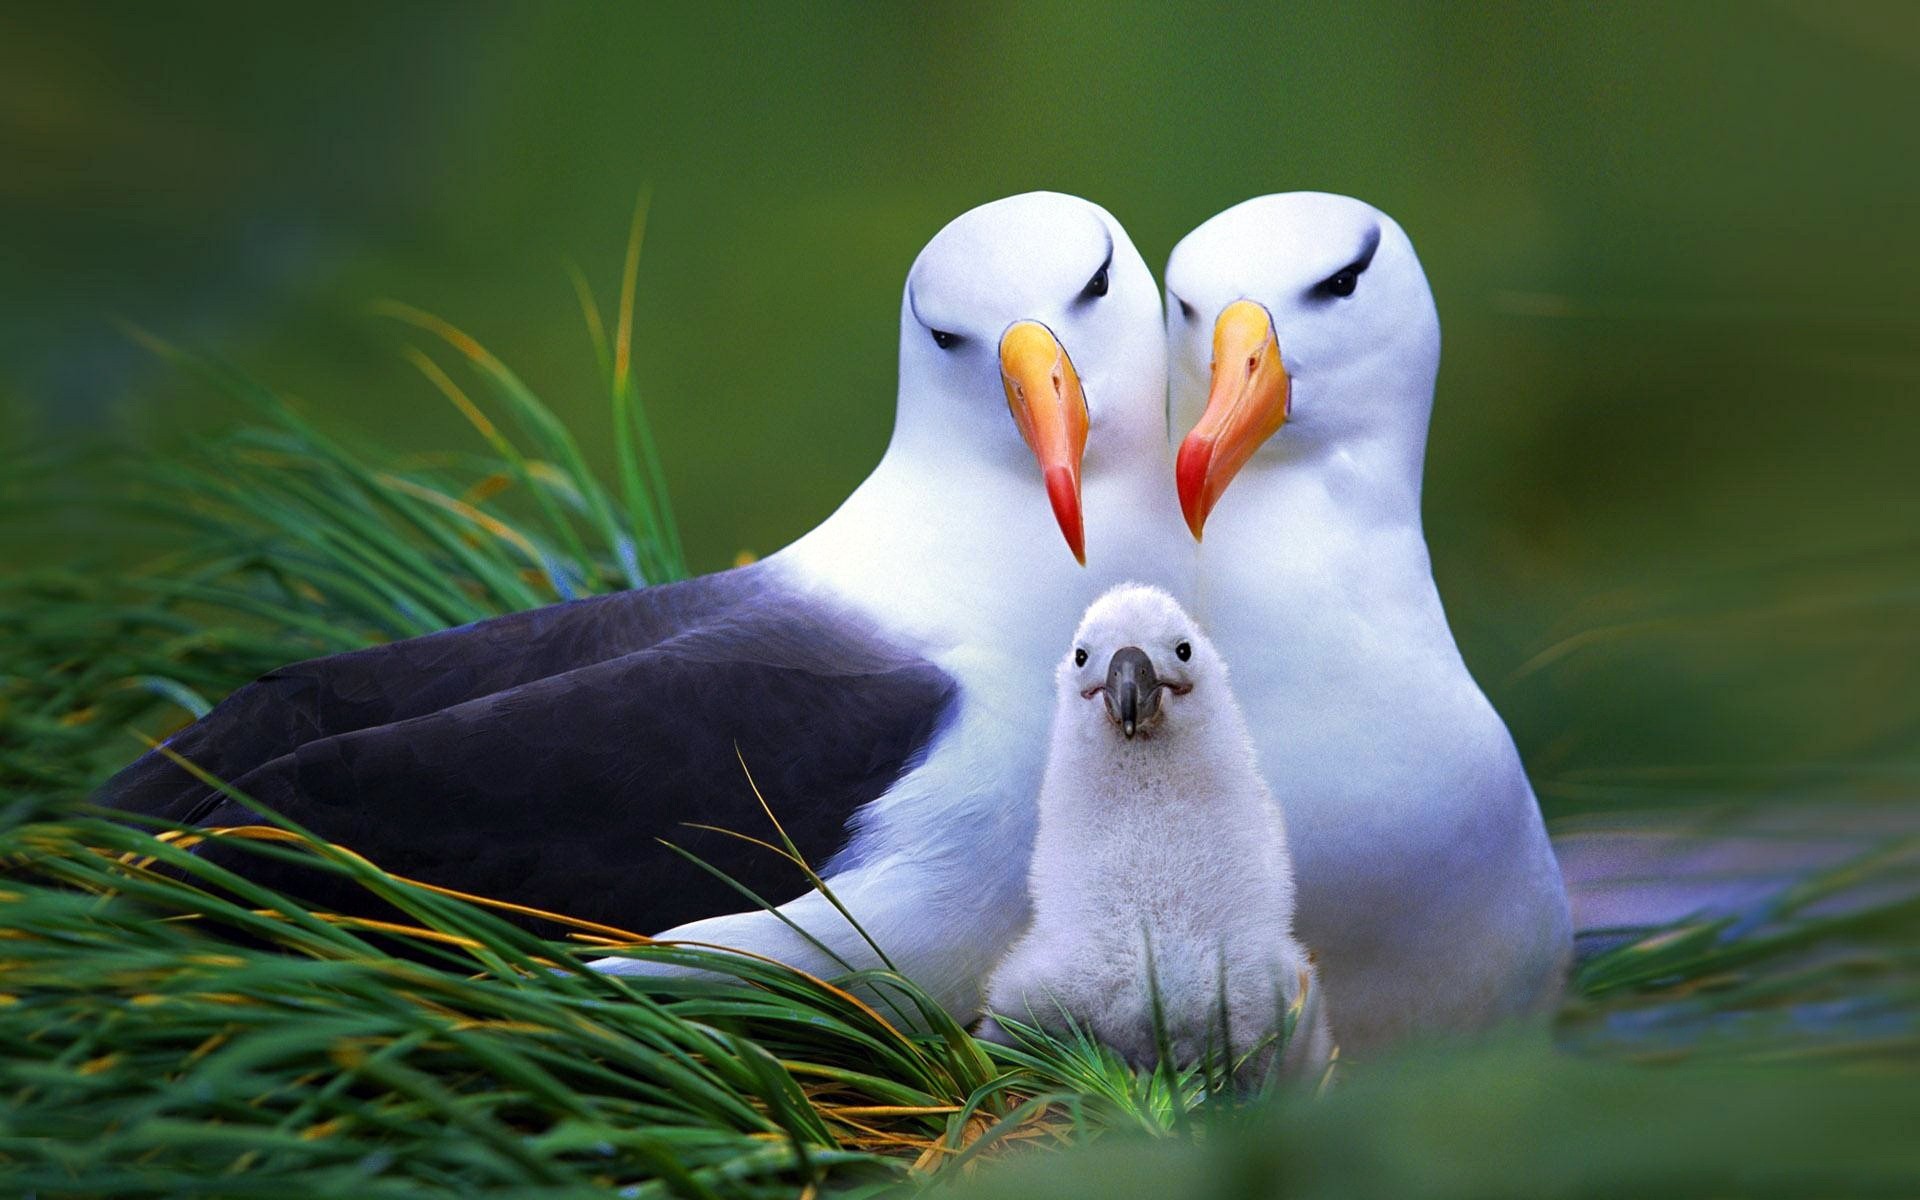 Animals___Birds_A_pair_of_seagulls_with_chicks_in_the_nest_108336_.jpg